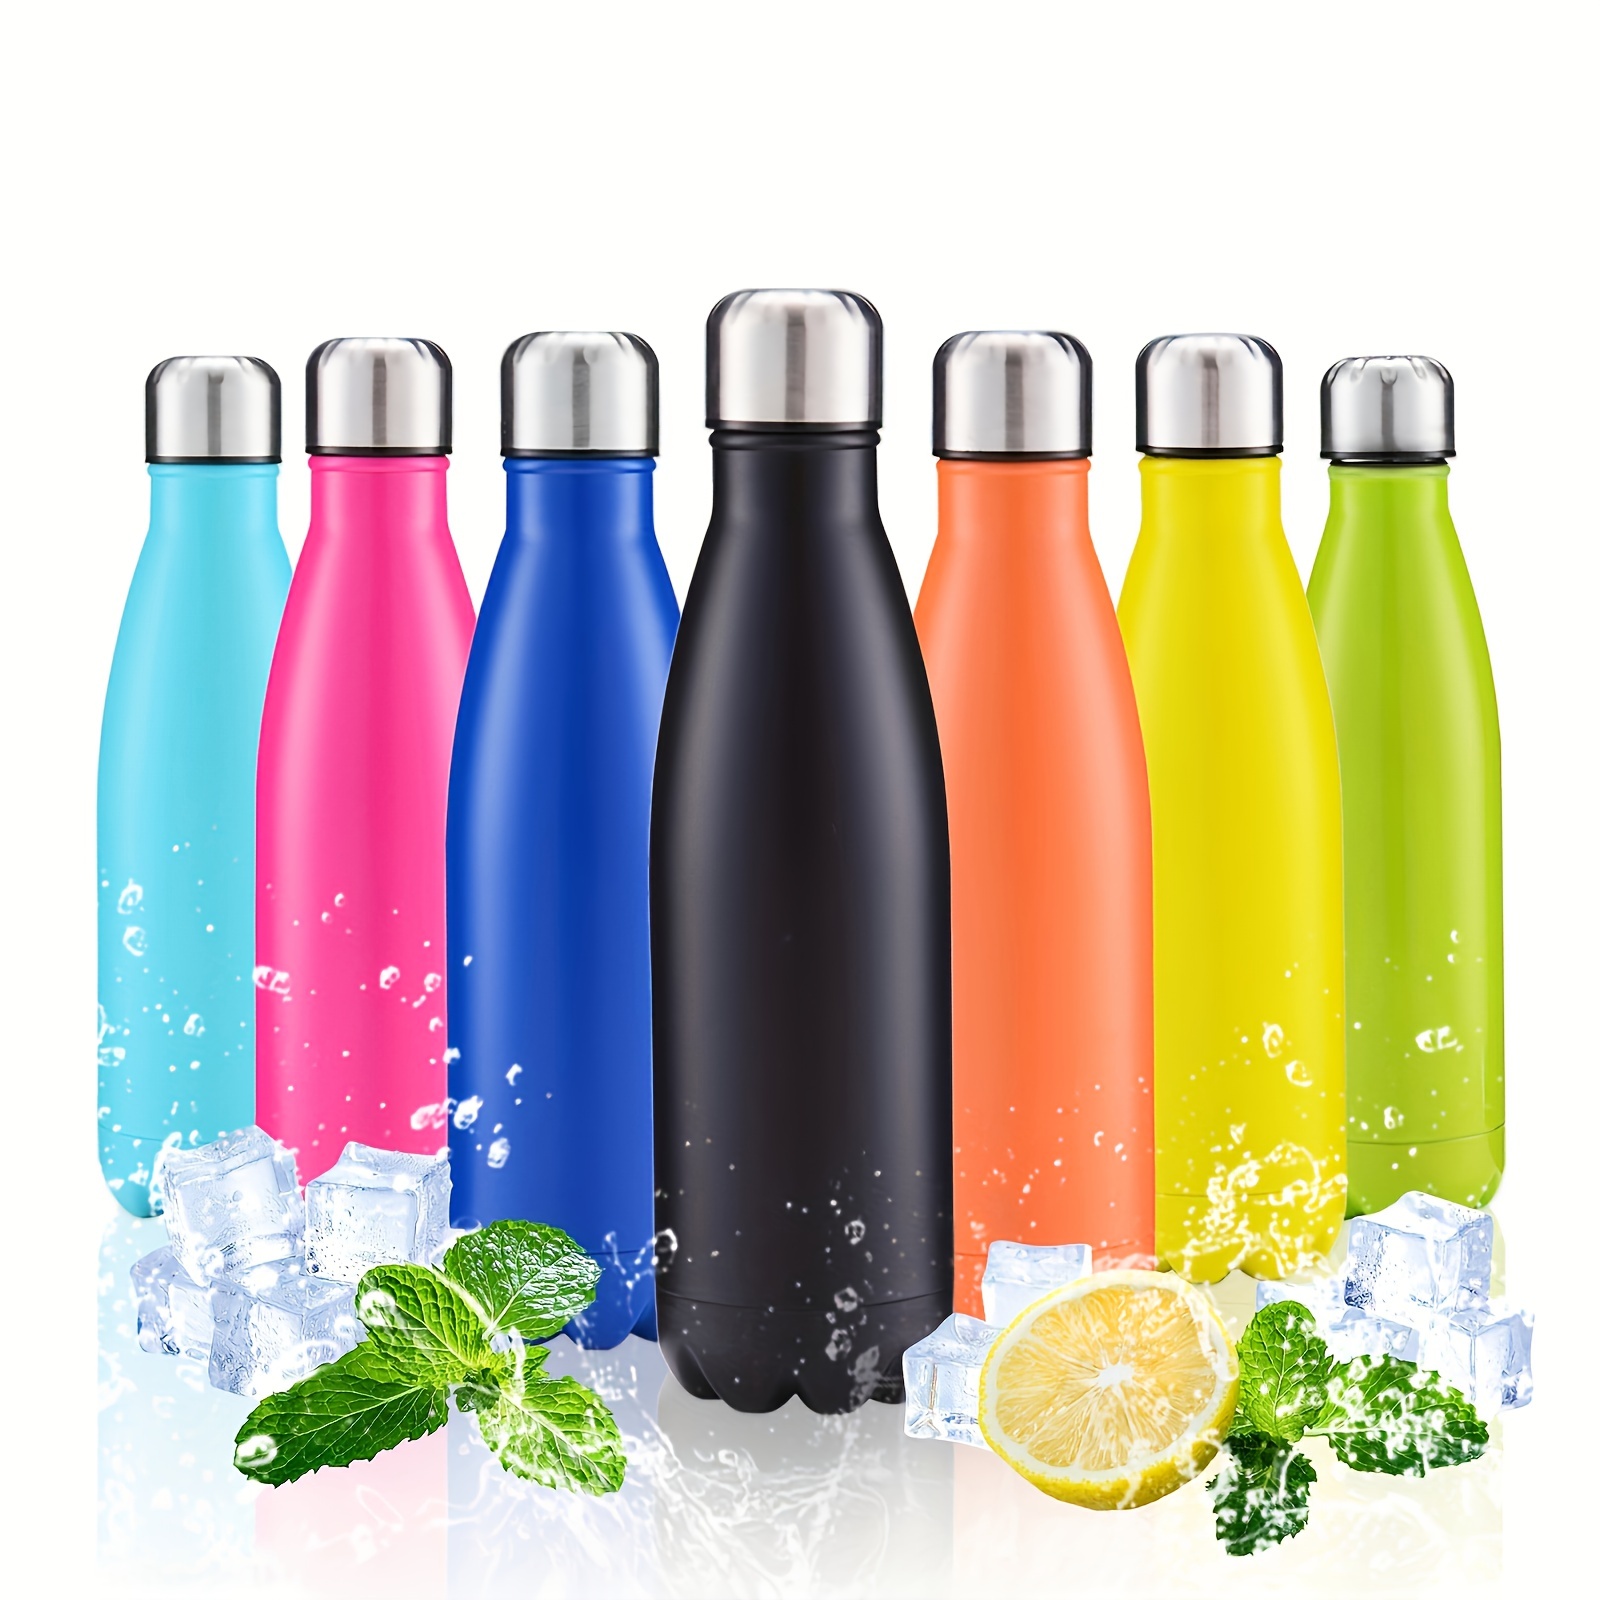 Thermoses Water Bottle Stainless Thermos 17oz Nitrogen Bottle Type Thermal  Cold Insulation Reusable Sports Water Bottles Leak Proof Carabiner Included